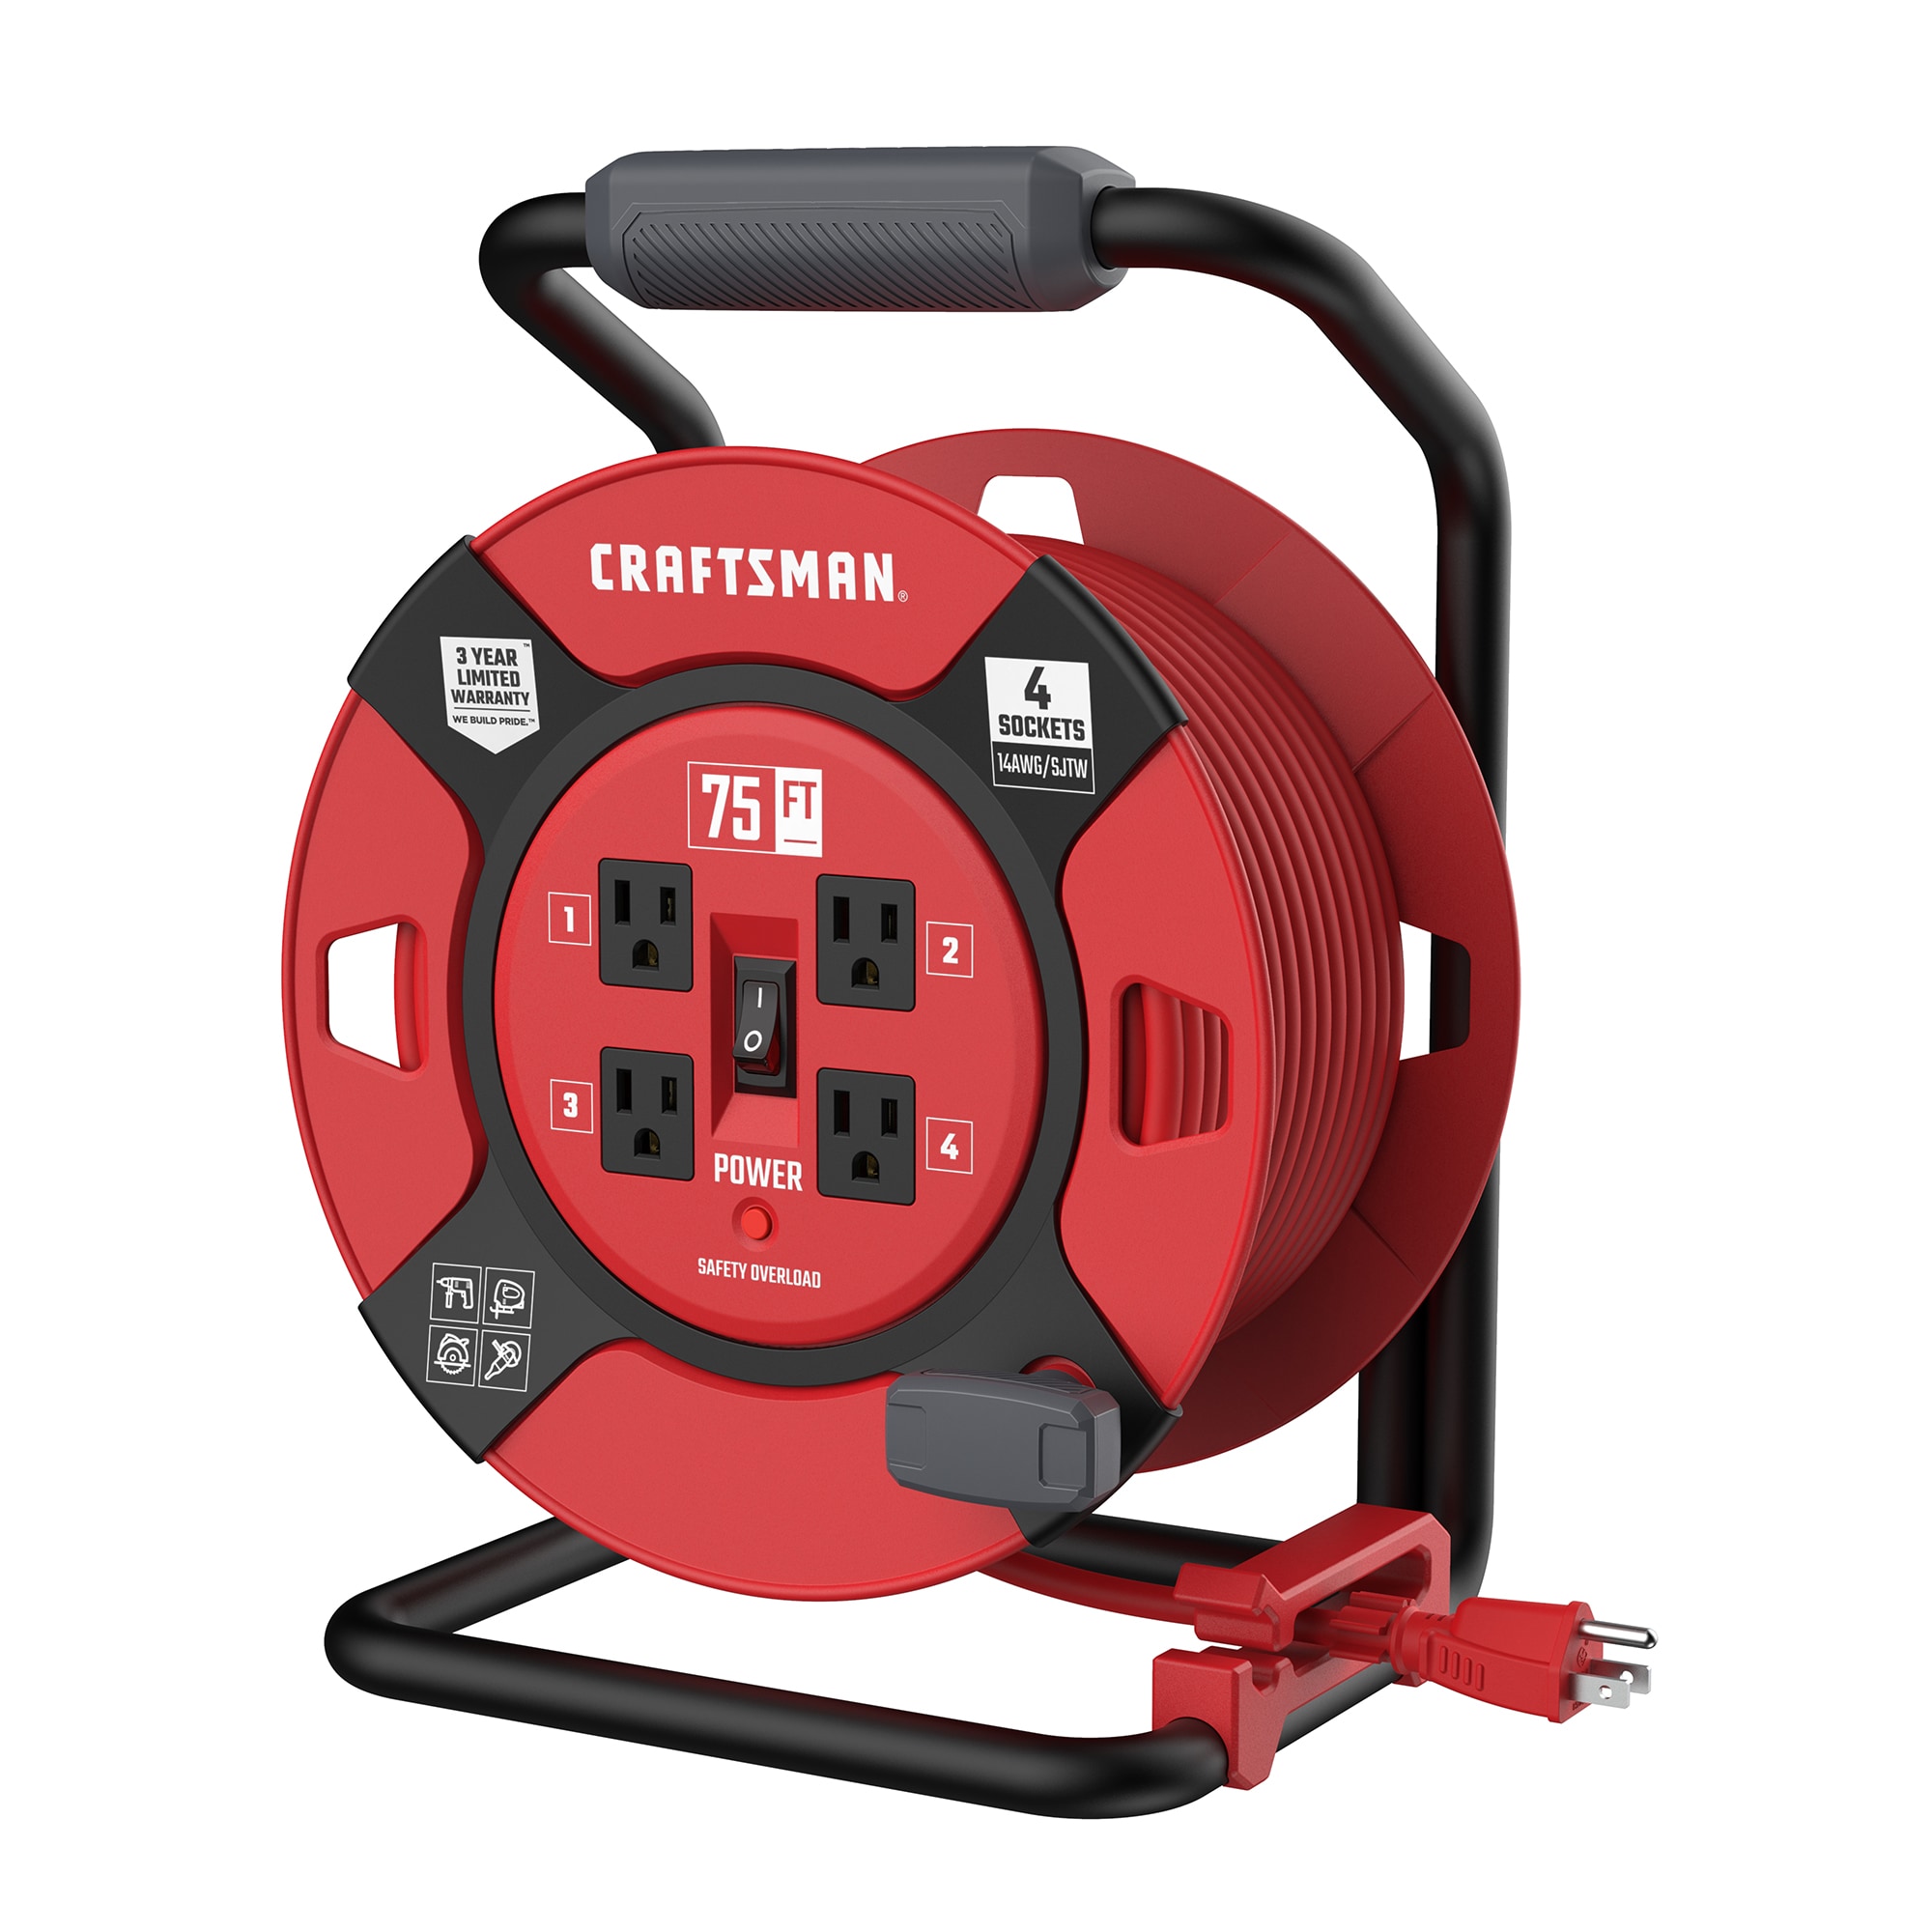 CRAFTSMAN Heavy Duty Retractable Extension Cord, 75 Ft with 4